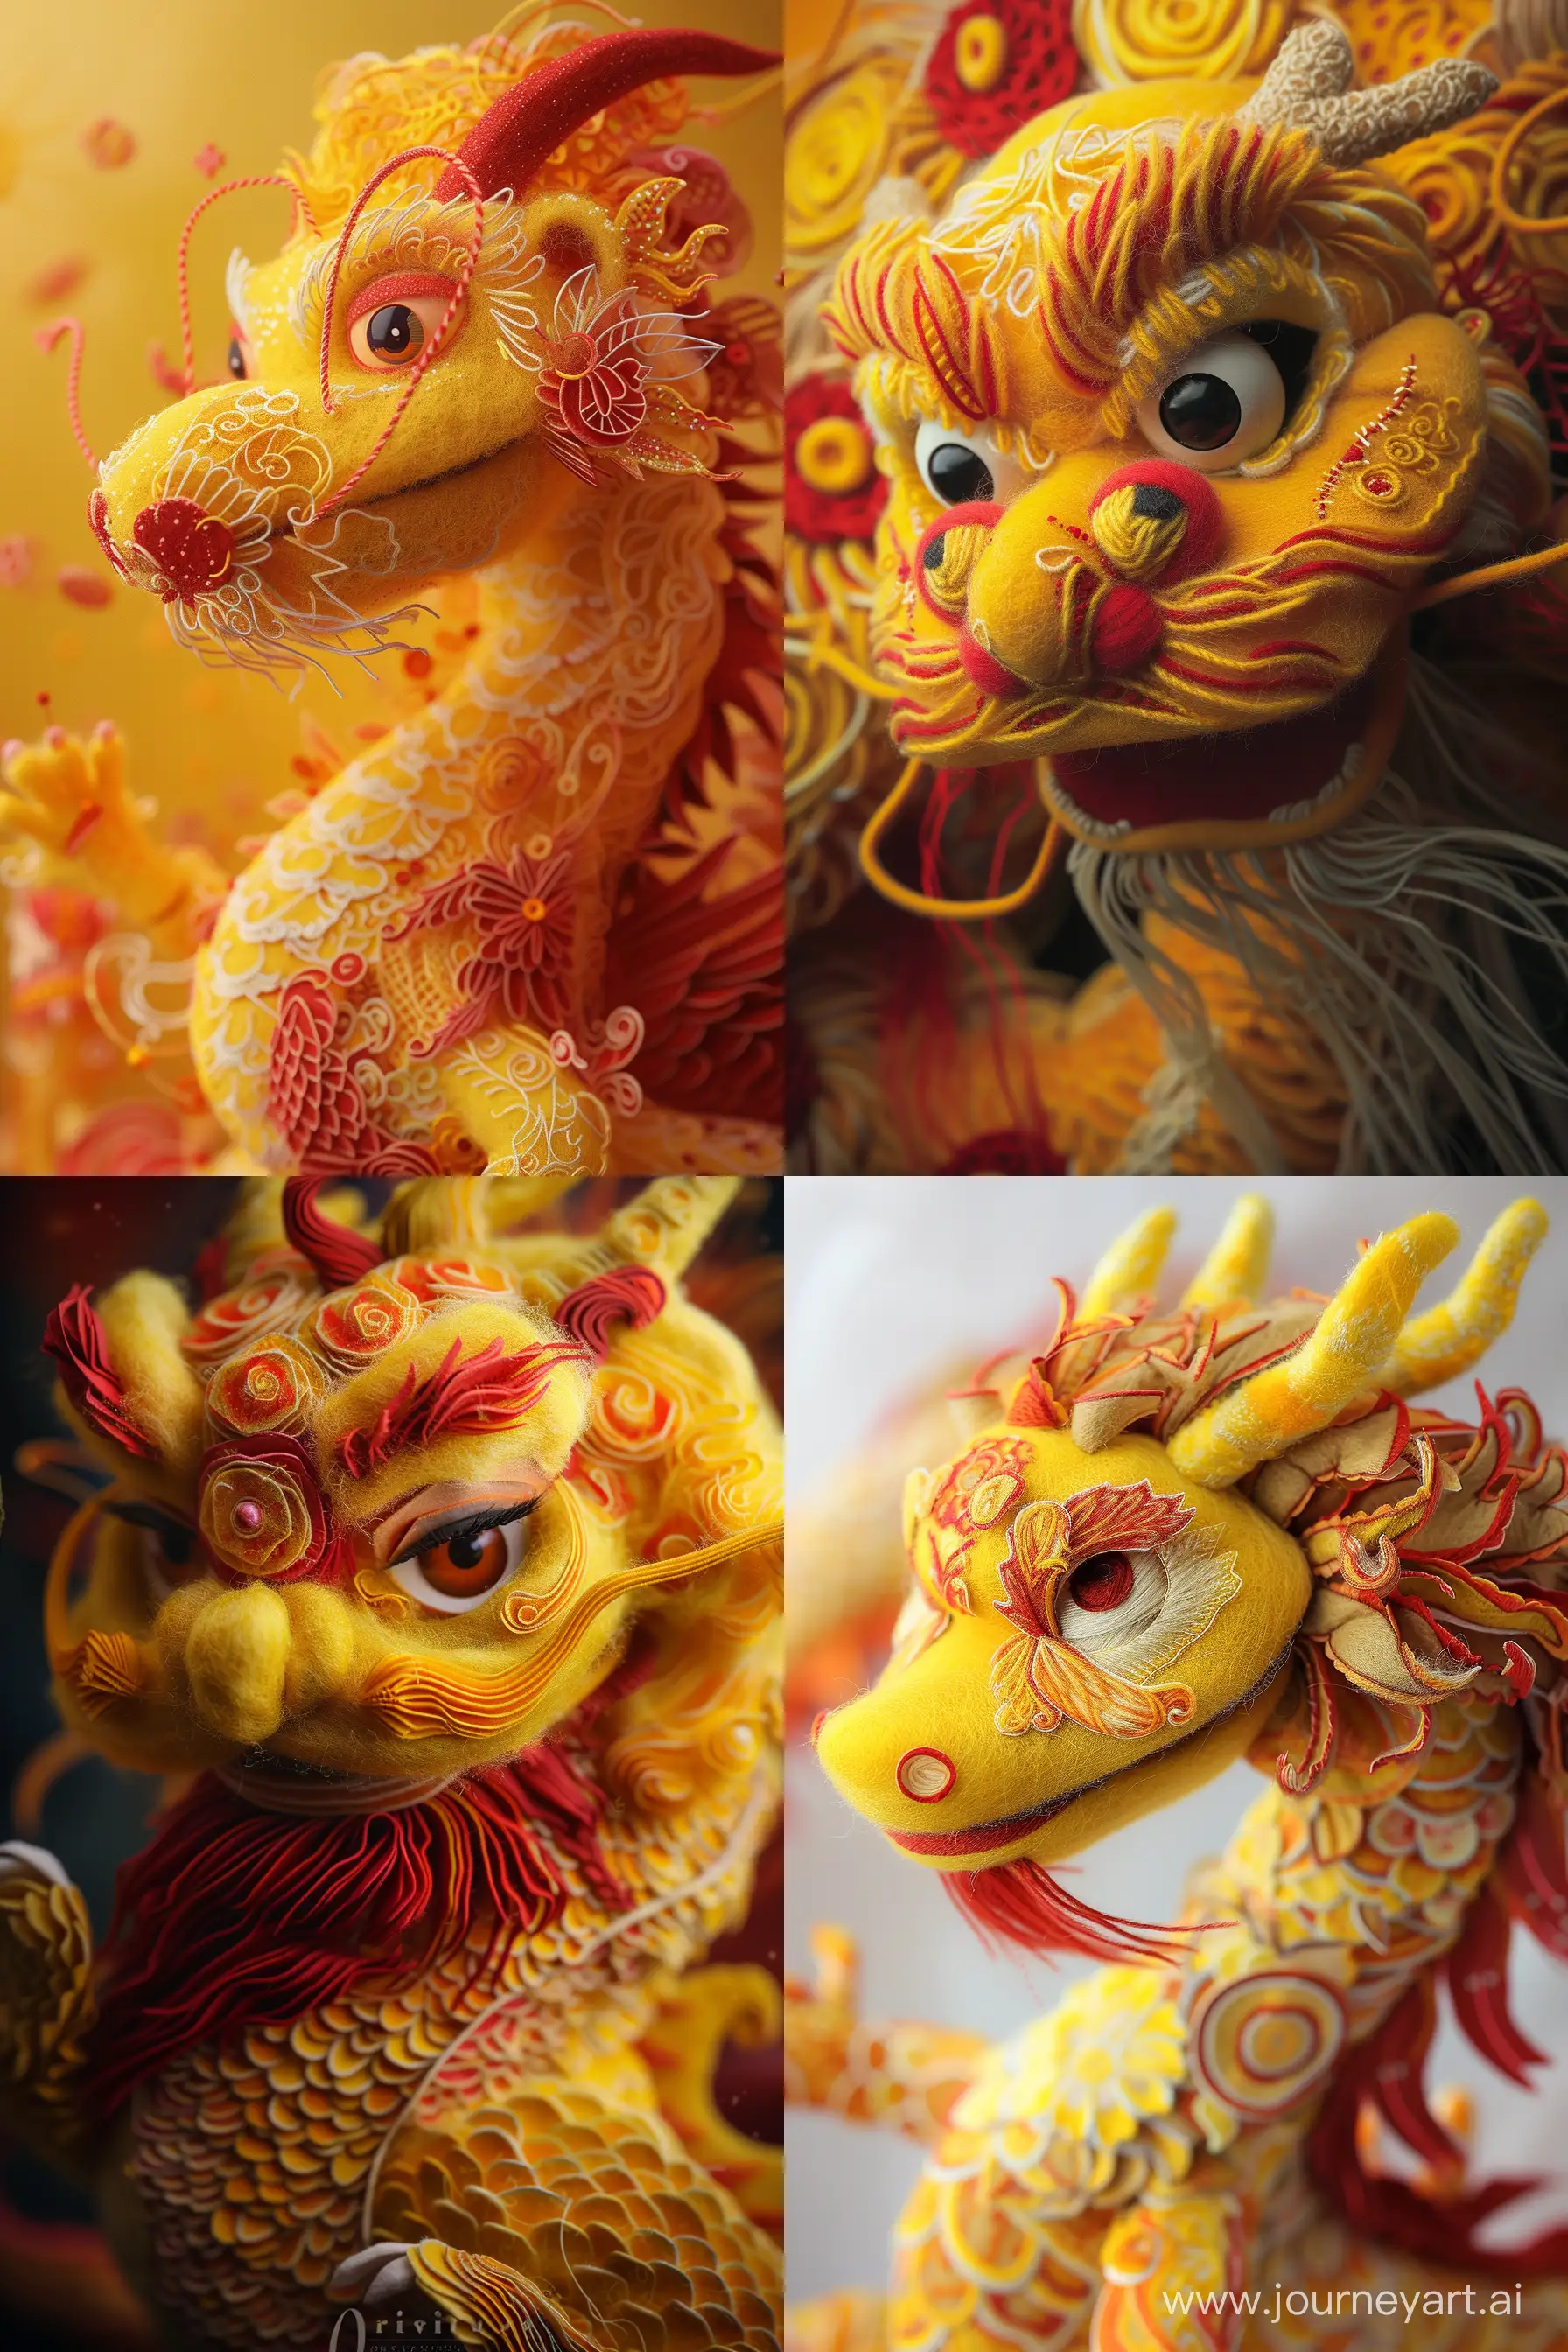 Intricate-Wool-Chinese-Dragon-Art-Vibrant-Yellow-and-Red-Dragon-Sculpture